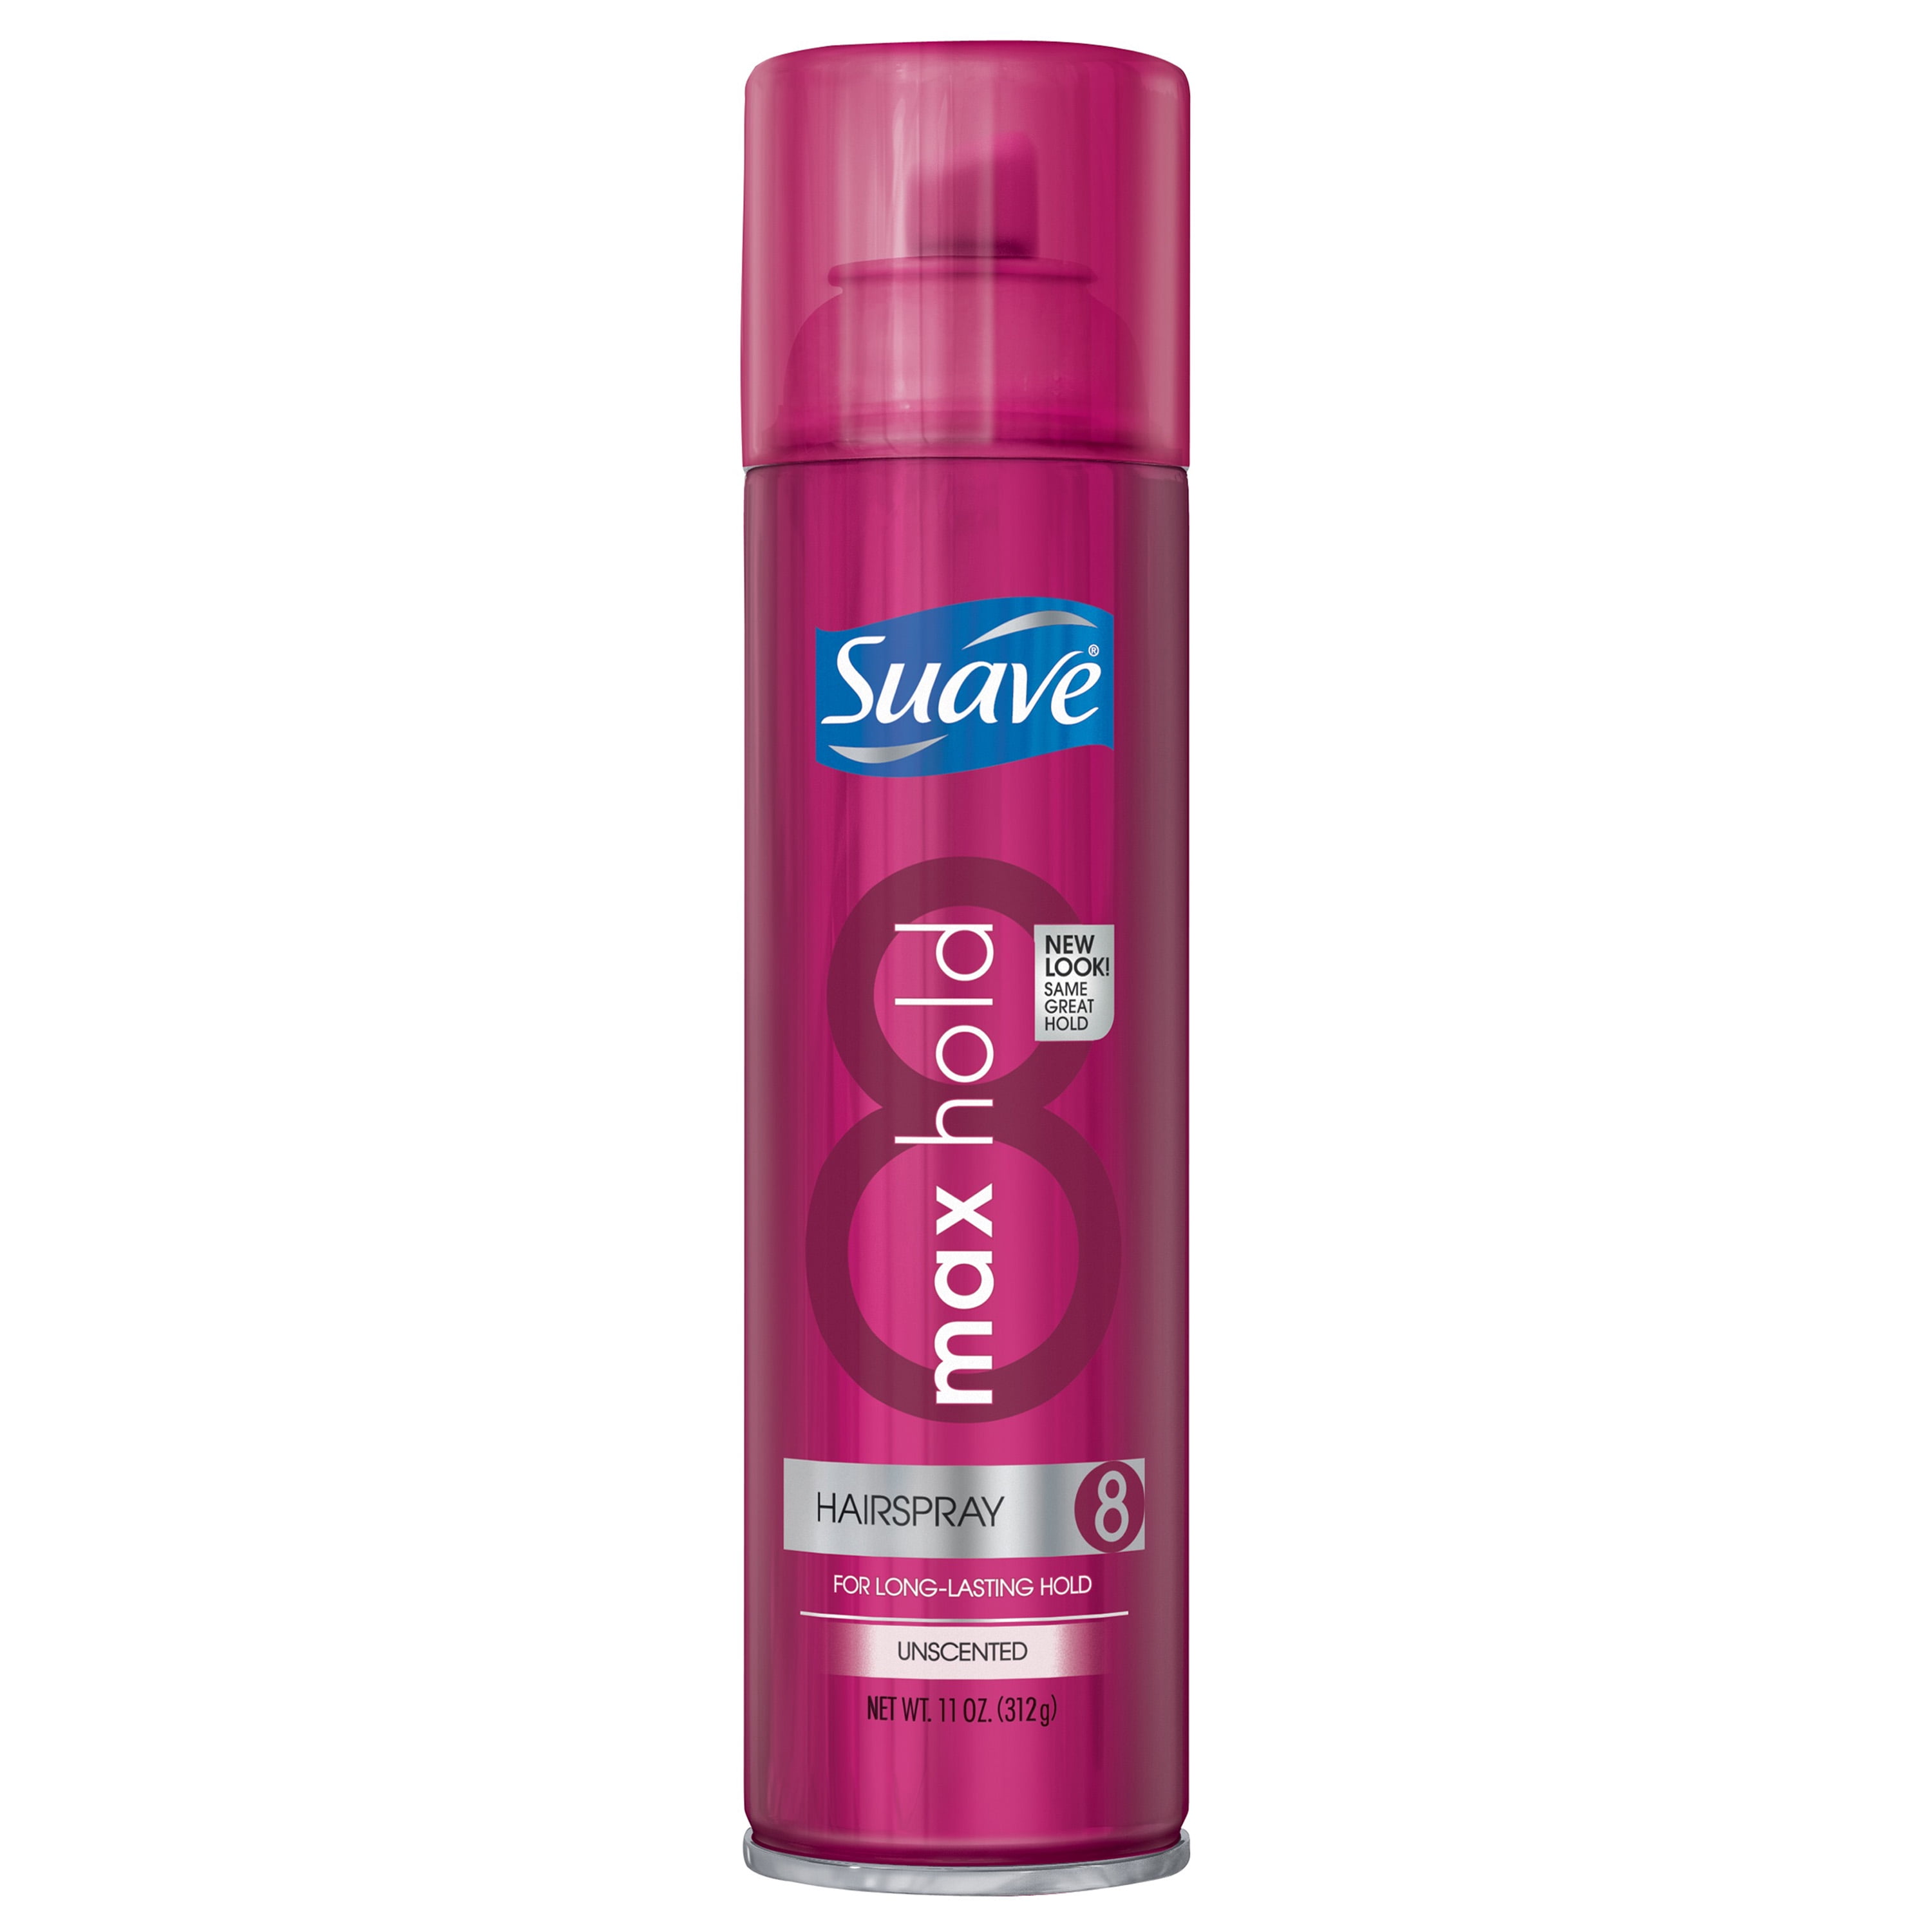 Suave Max Hold Unscented Hairspray, 11 oz - Walmart.com.